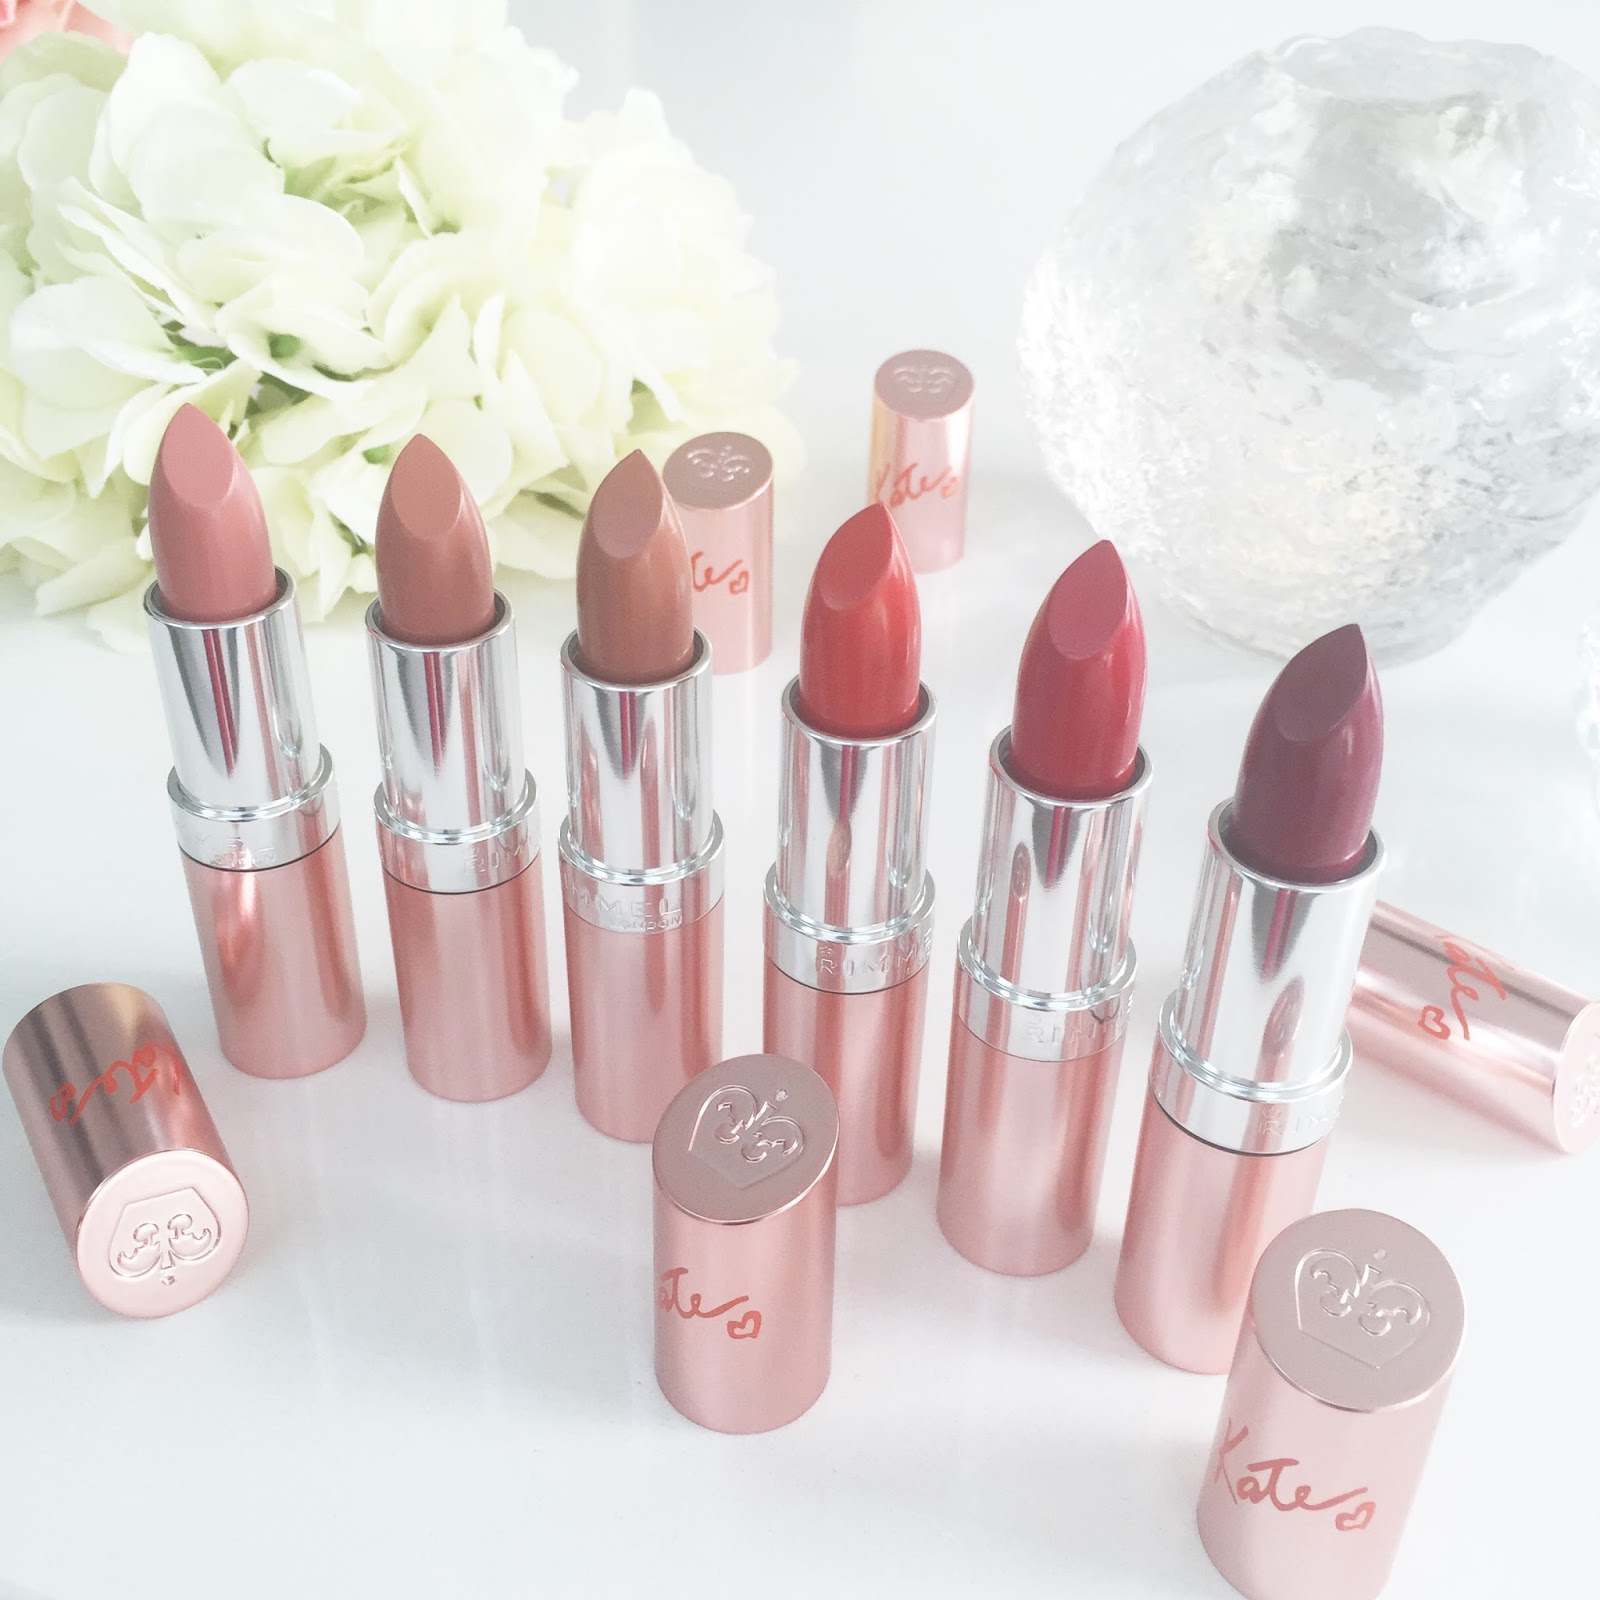 London by Kate 15 Year Collection Lasting Finish Lipstick 